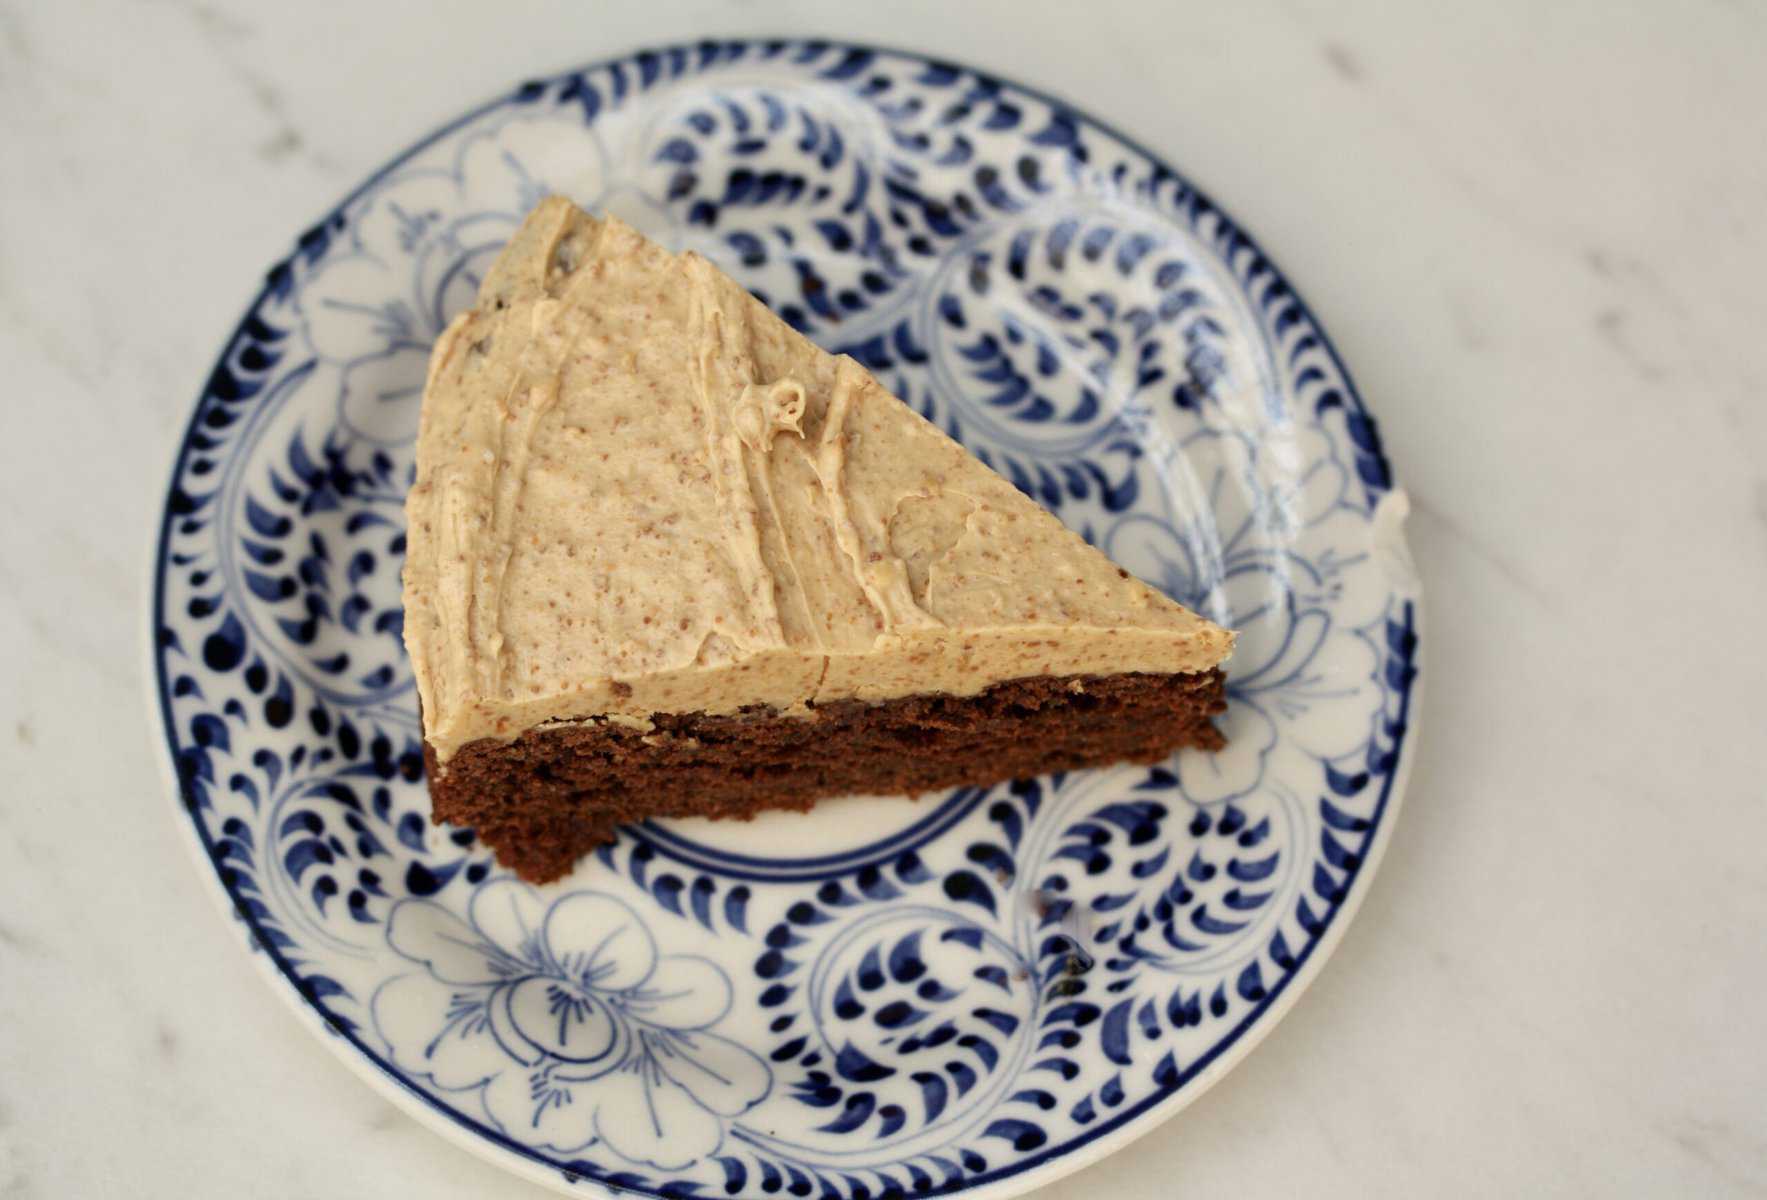 A slice of buttermilk chocolate cake with peanut butter frosting on a blue and white plate.